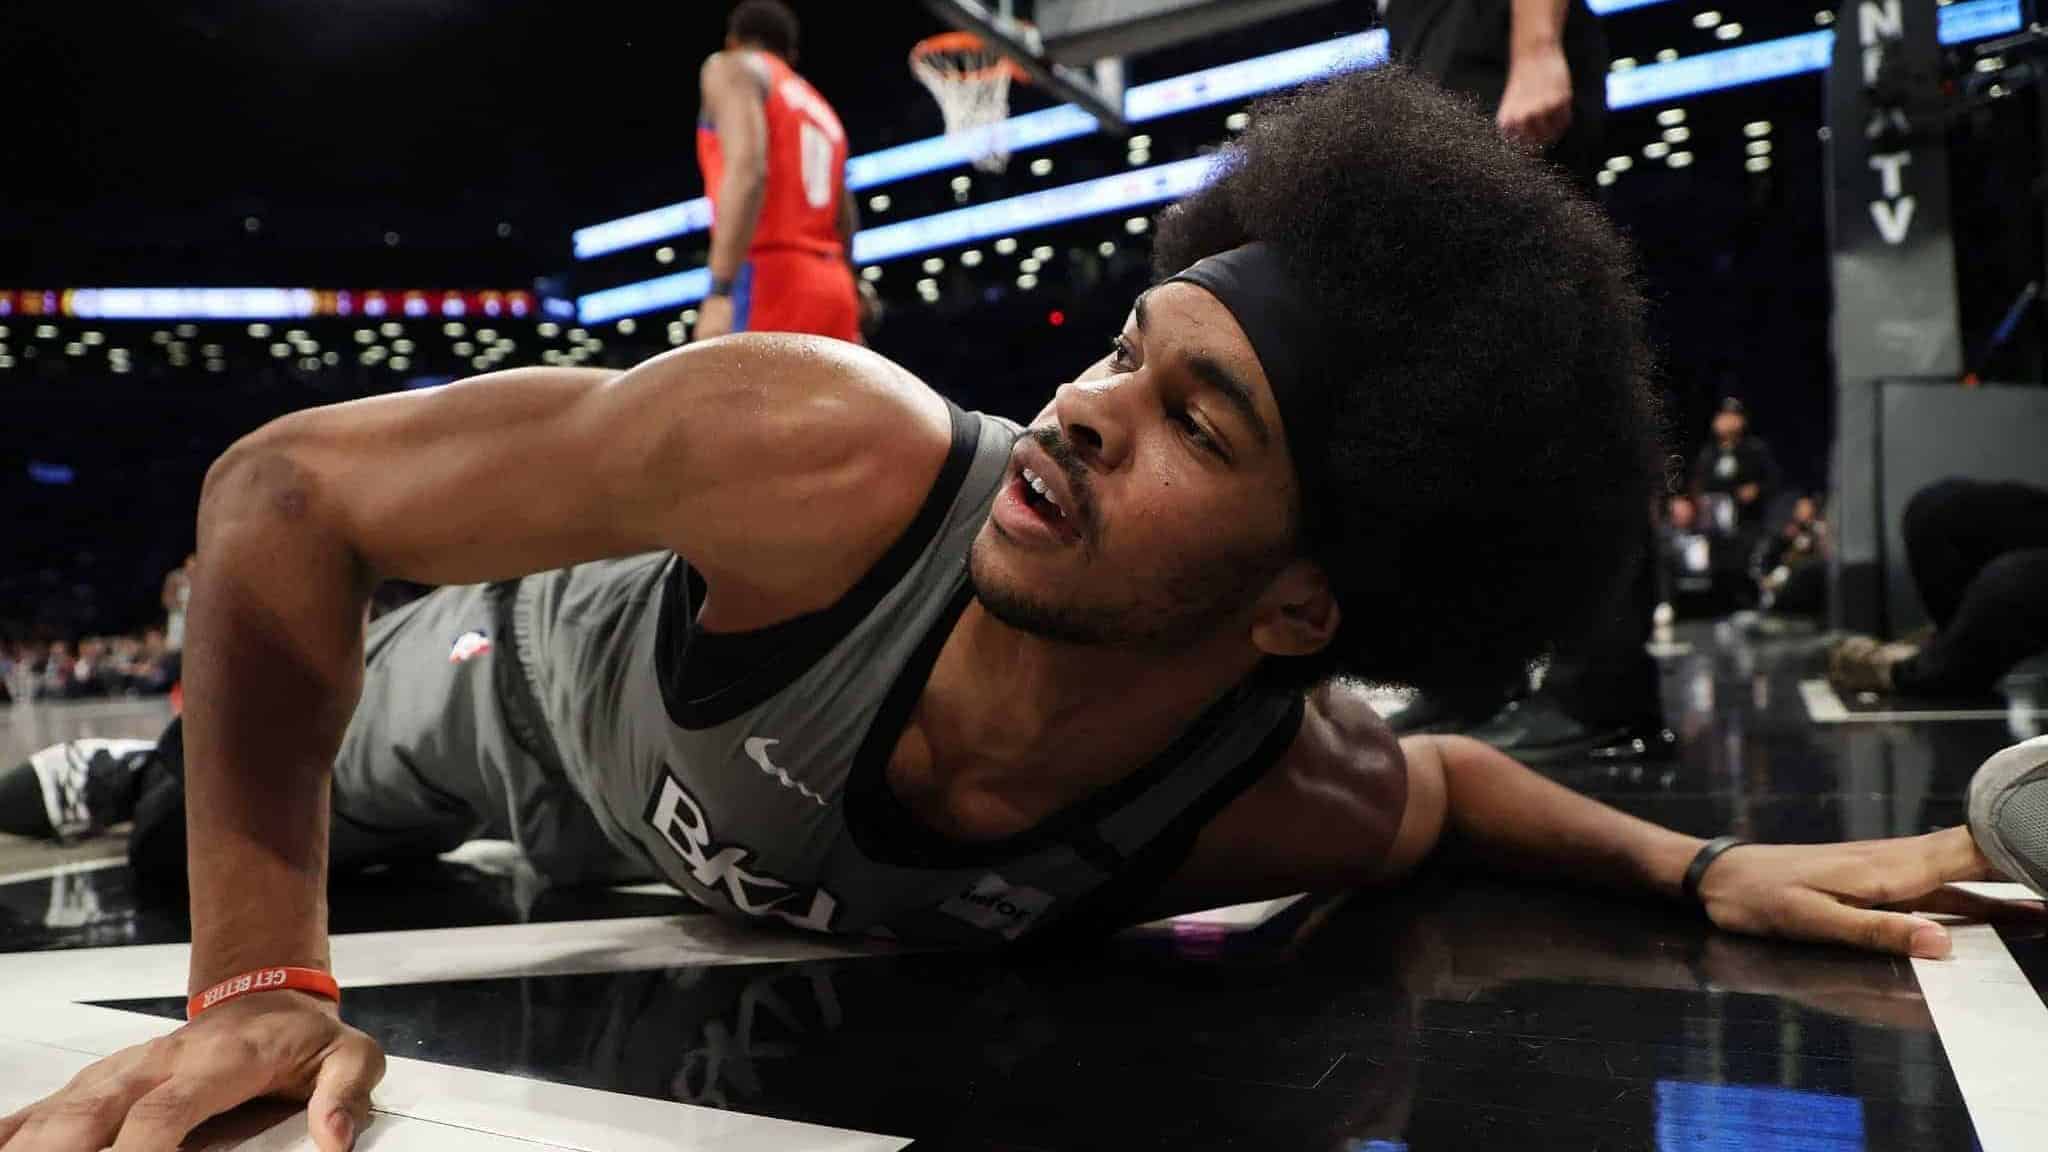 NEW YORK, NEW YORK - JANUARY 29: Jarrett Allen #31 of the Brooklyn Nets falls against the Detroit Pistons during their game at Barclays Center on January 29, 2020 in New York City.